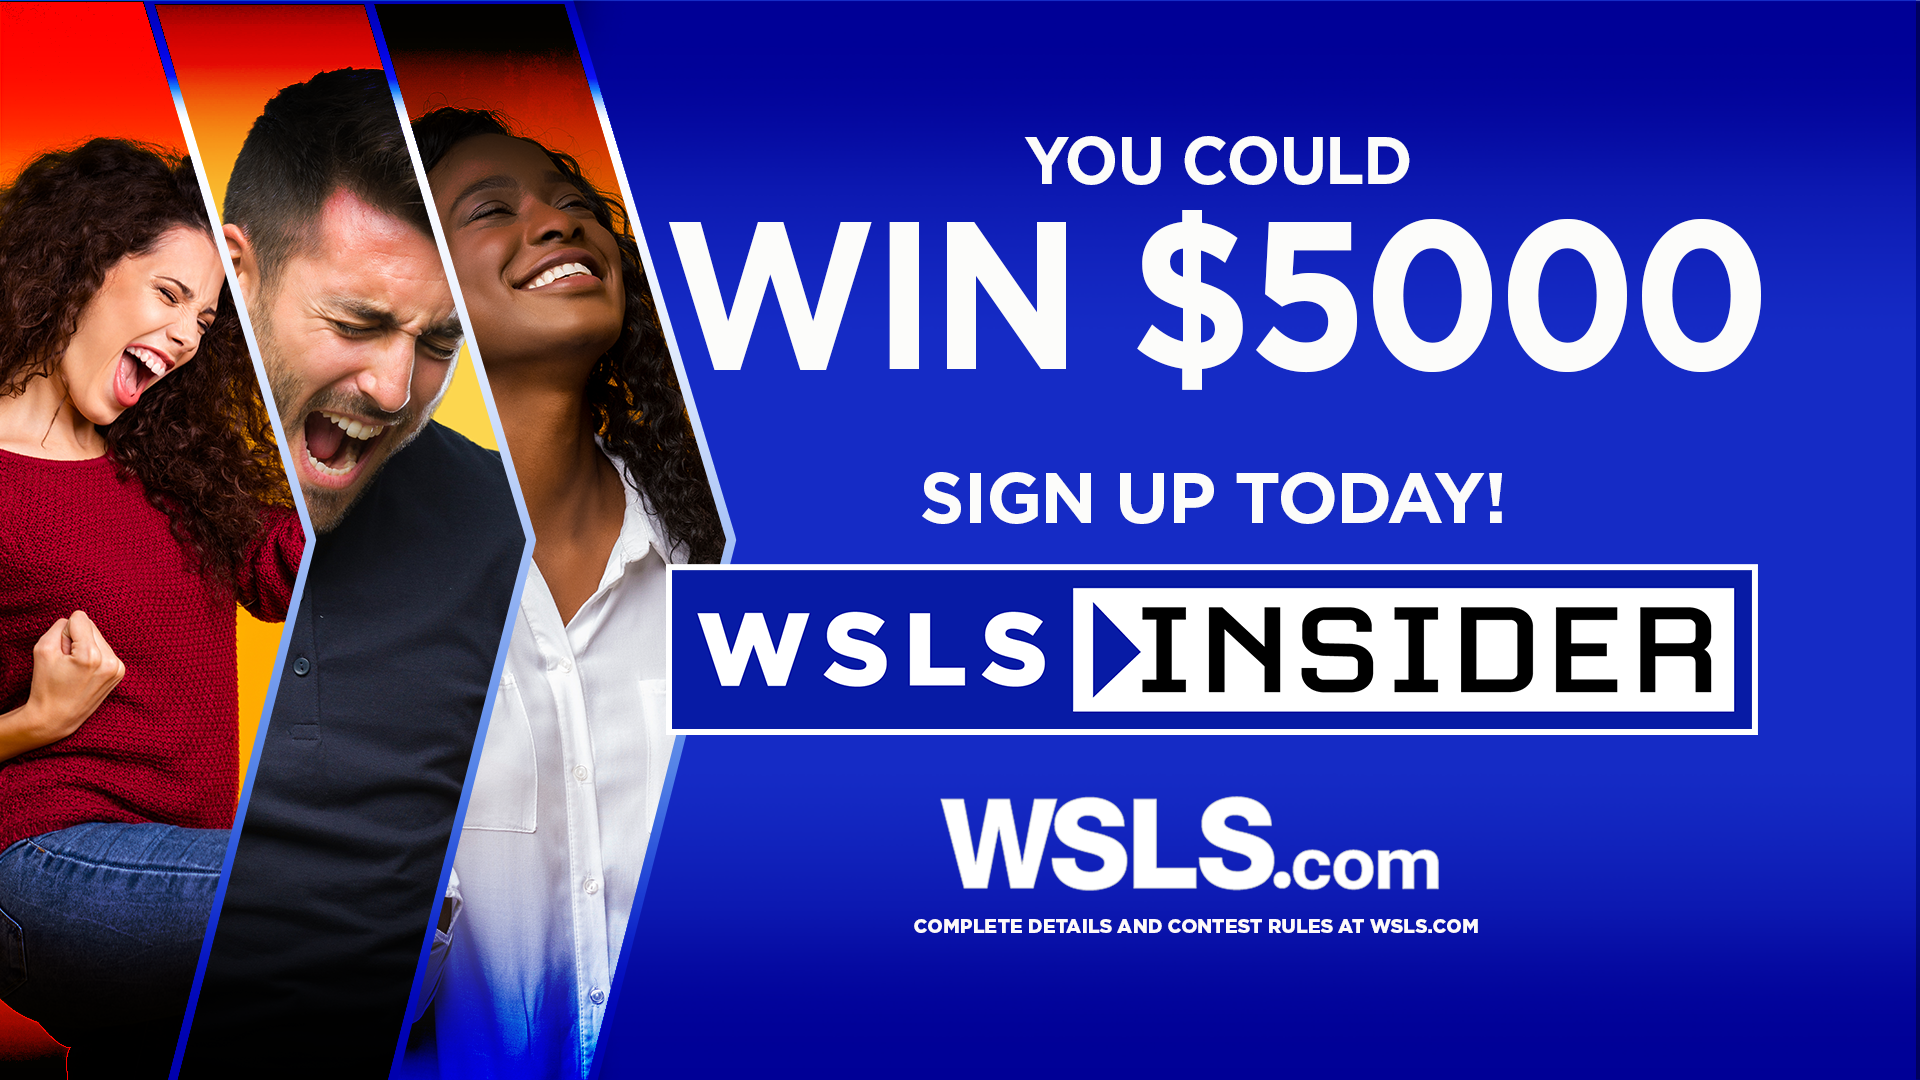 Hey Insiders! Here's your chance to enter to win a $5,000 prize🤩